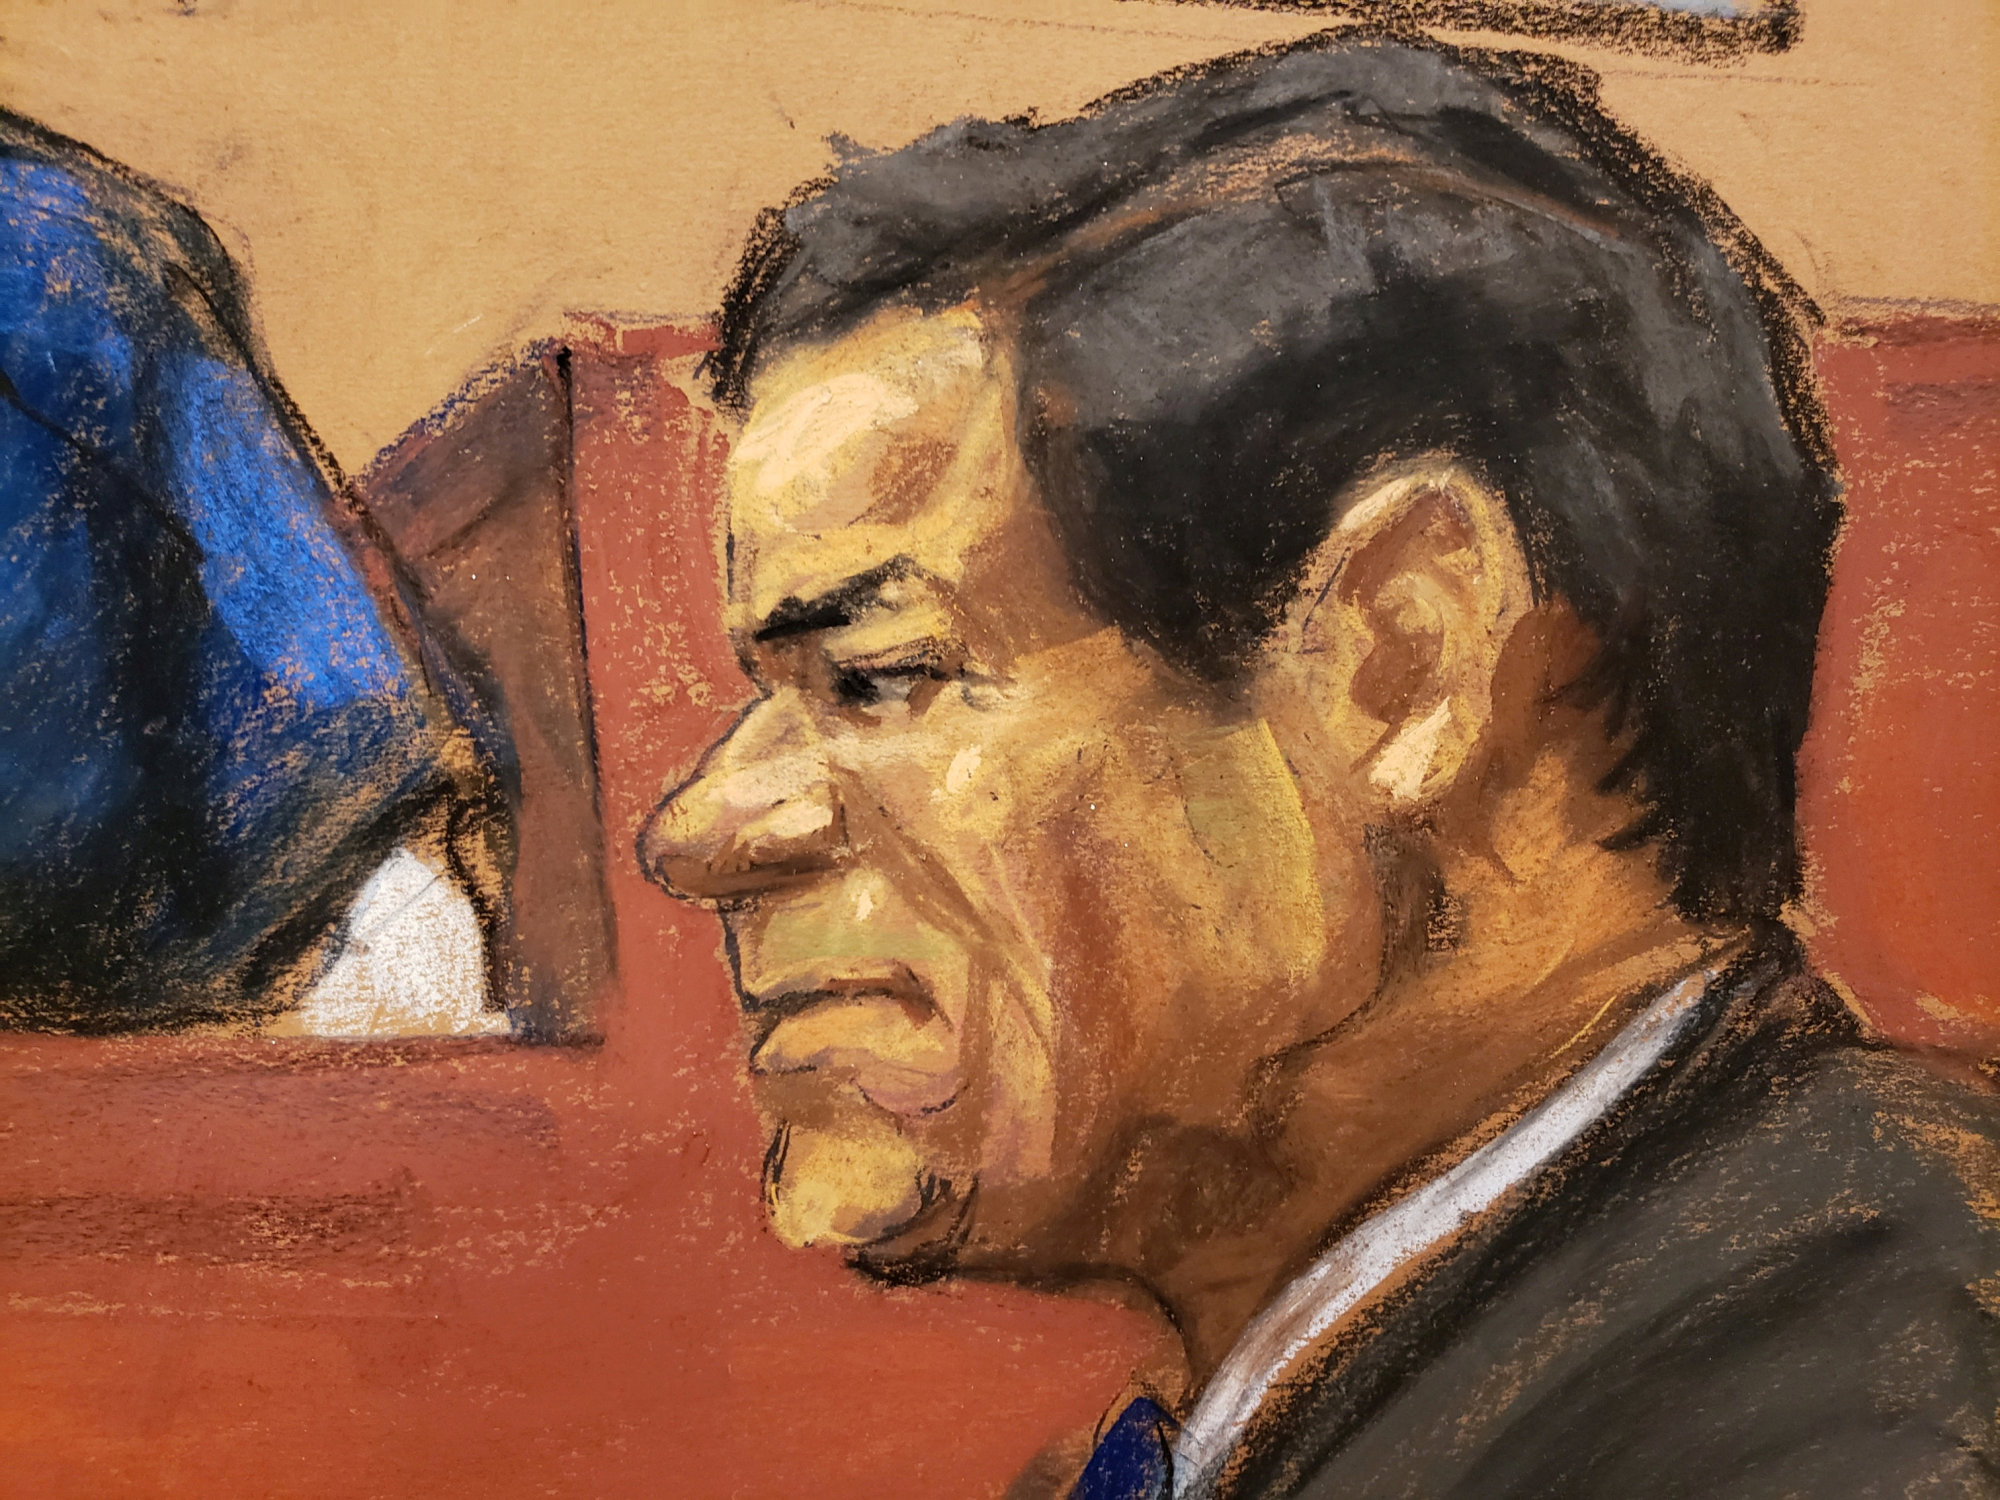 Jury enters second day of deliberations in 'El Chapo' trial - The Japan ...